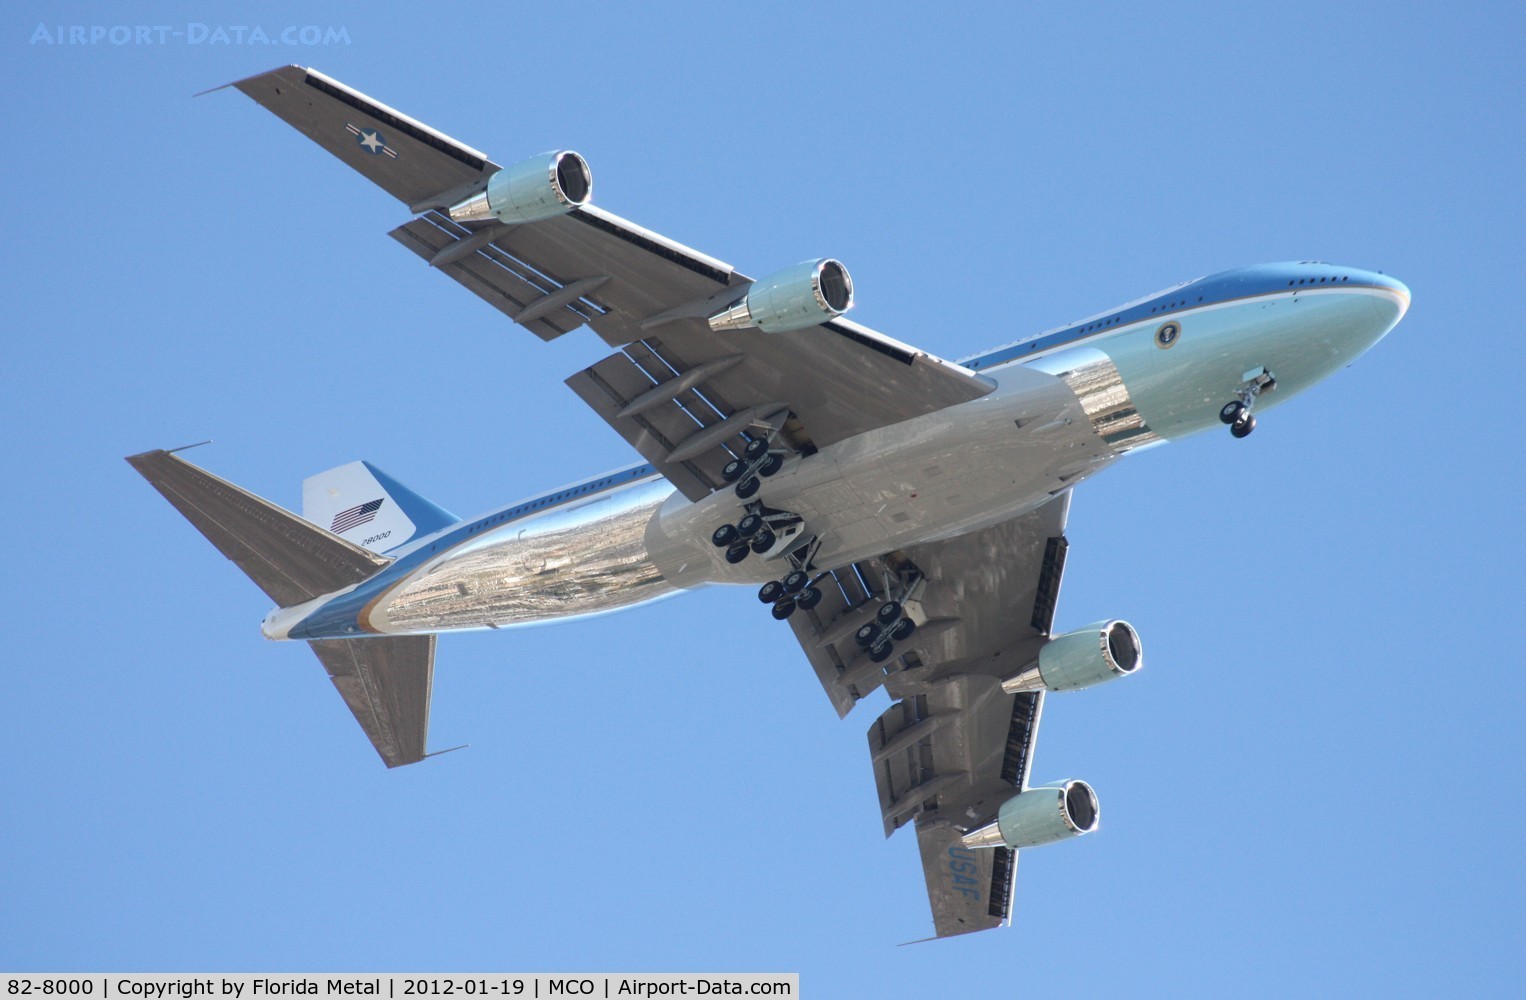 82-8000, 1987 Boeing VC-25A (747-2G4B) C/N 23824, Air Force One on approach